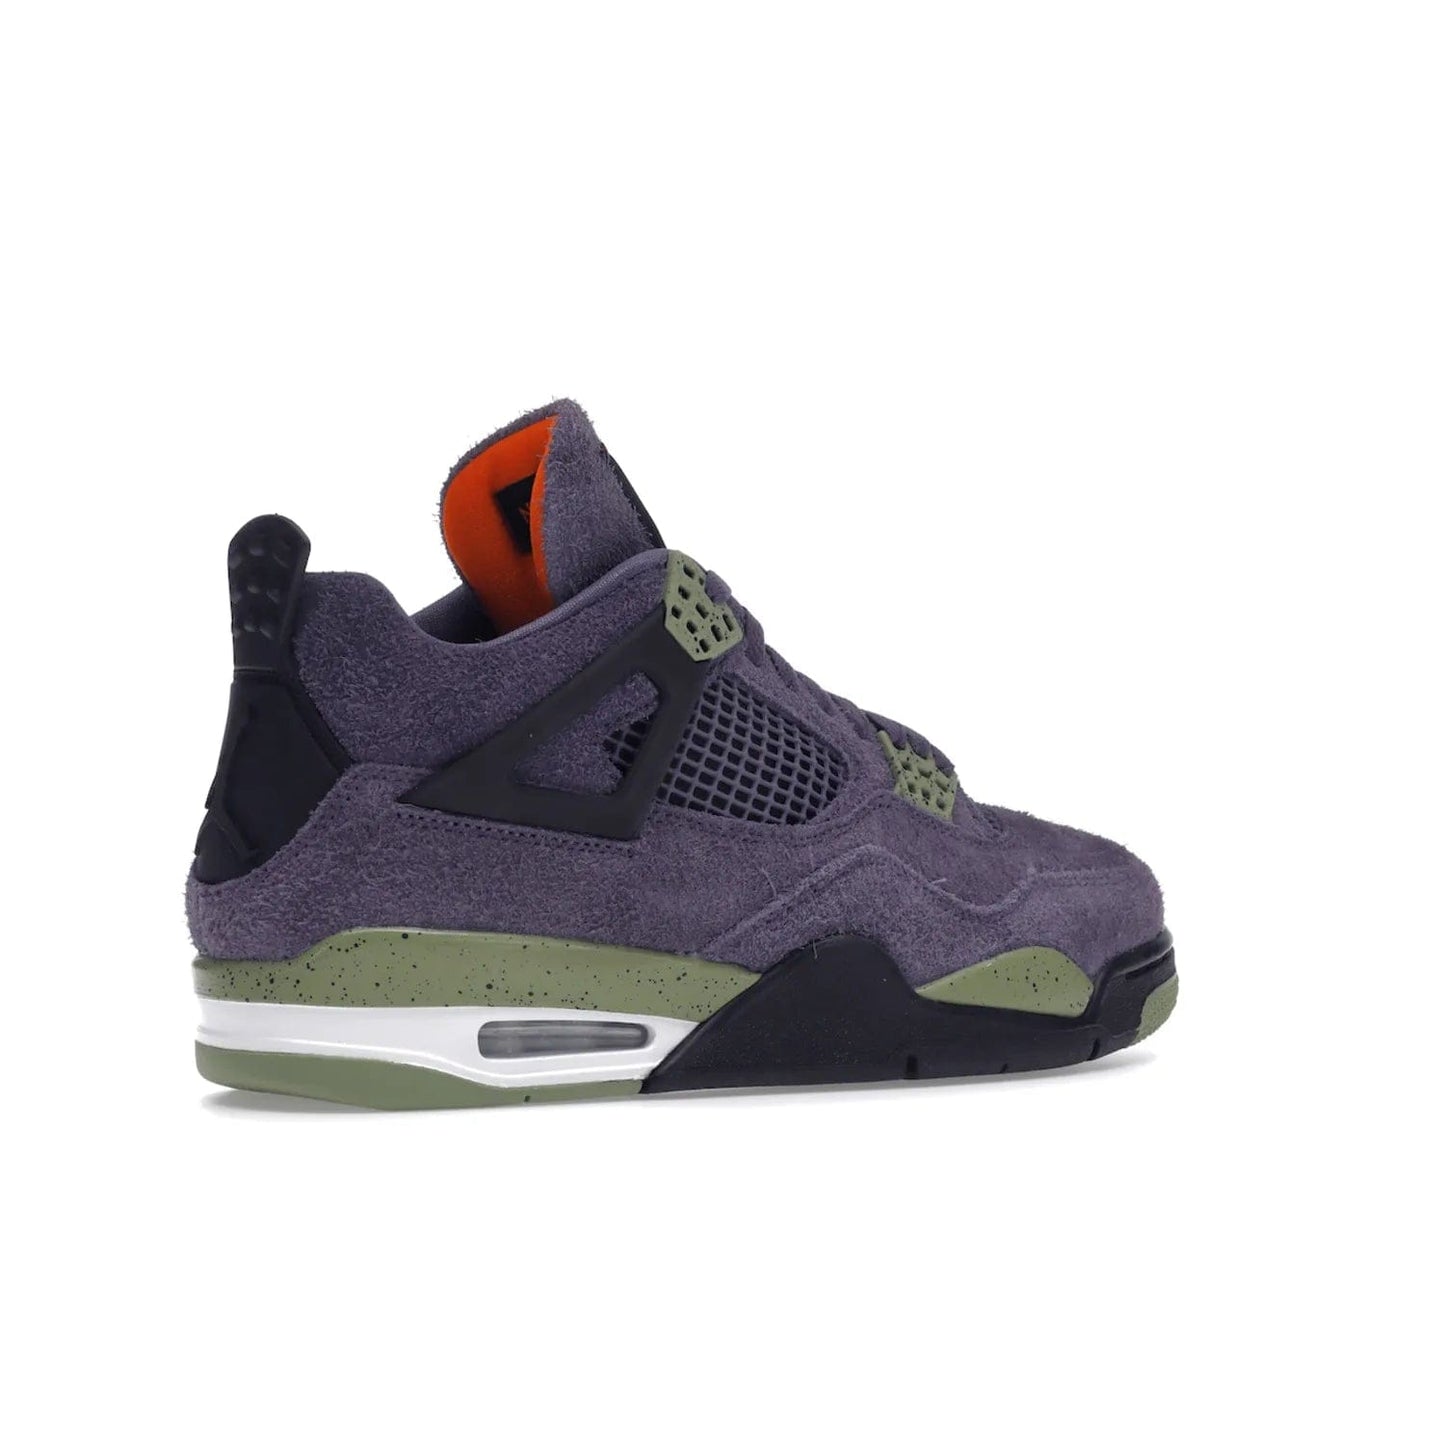 Jordan 4 Retro Canyon Purple (Women's) - Image 34 - Only at www.BallersClubKickz.com - New Air Jordan 4 Retro Canyon Purple W sneaker features shaggy purple suede, lime highlights & safety orange Jumpman branding. Classic ankle-hugging silhouette with modern colors released 15/10/2022.